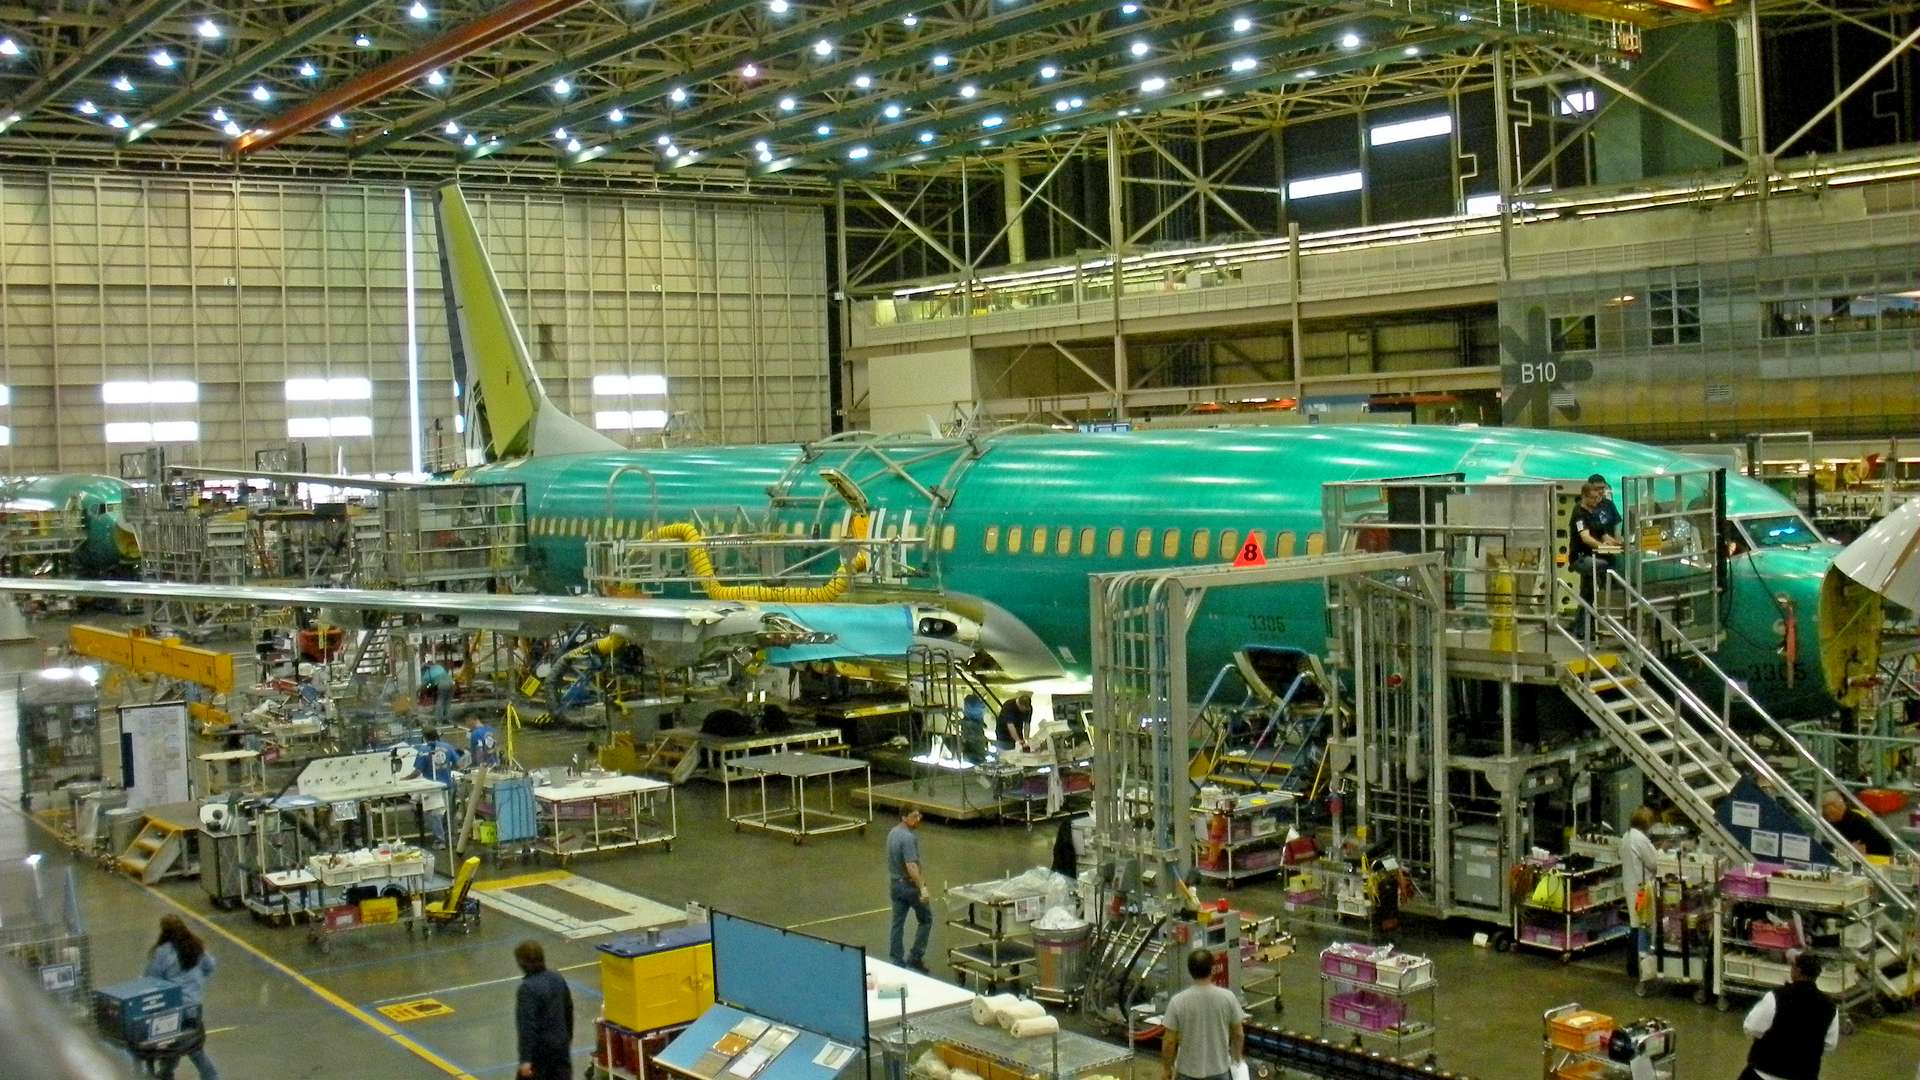 FAA Ungrounds The MAX-9 – But There’s Bad News For Boeing